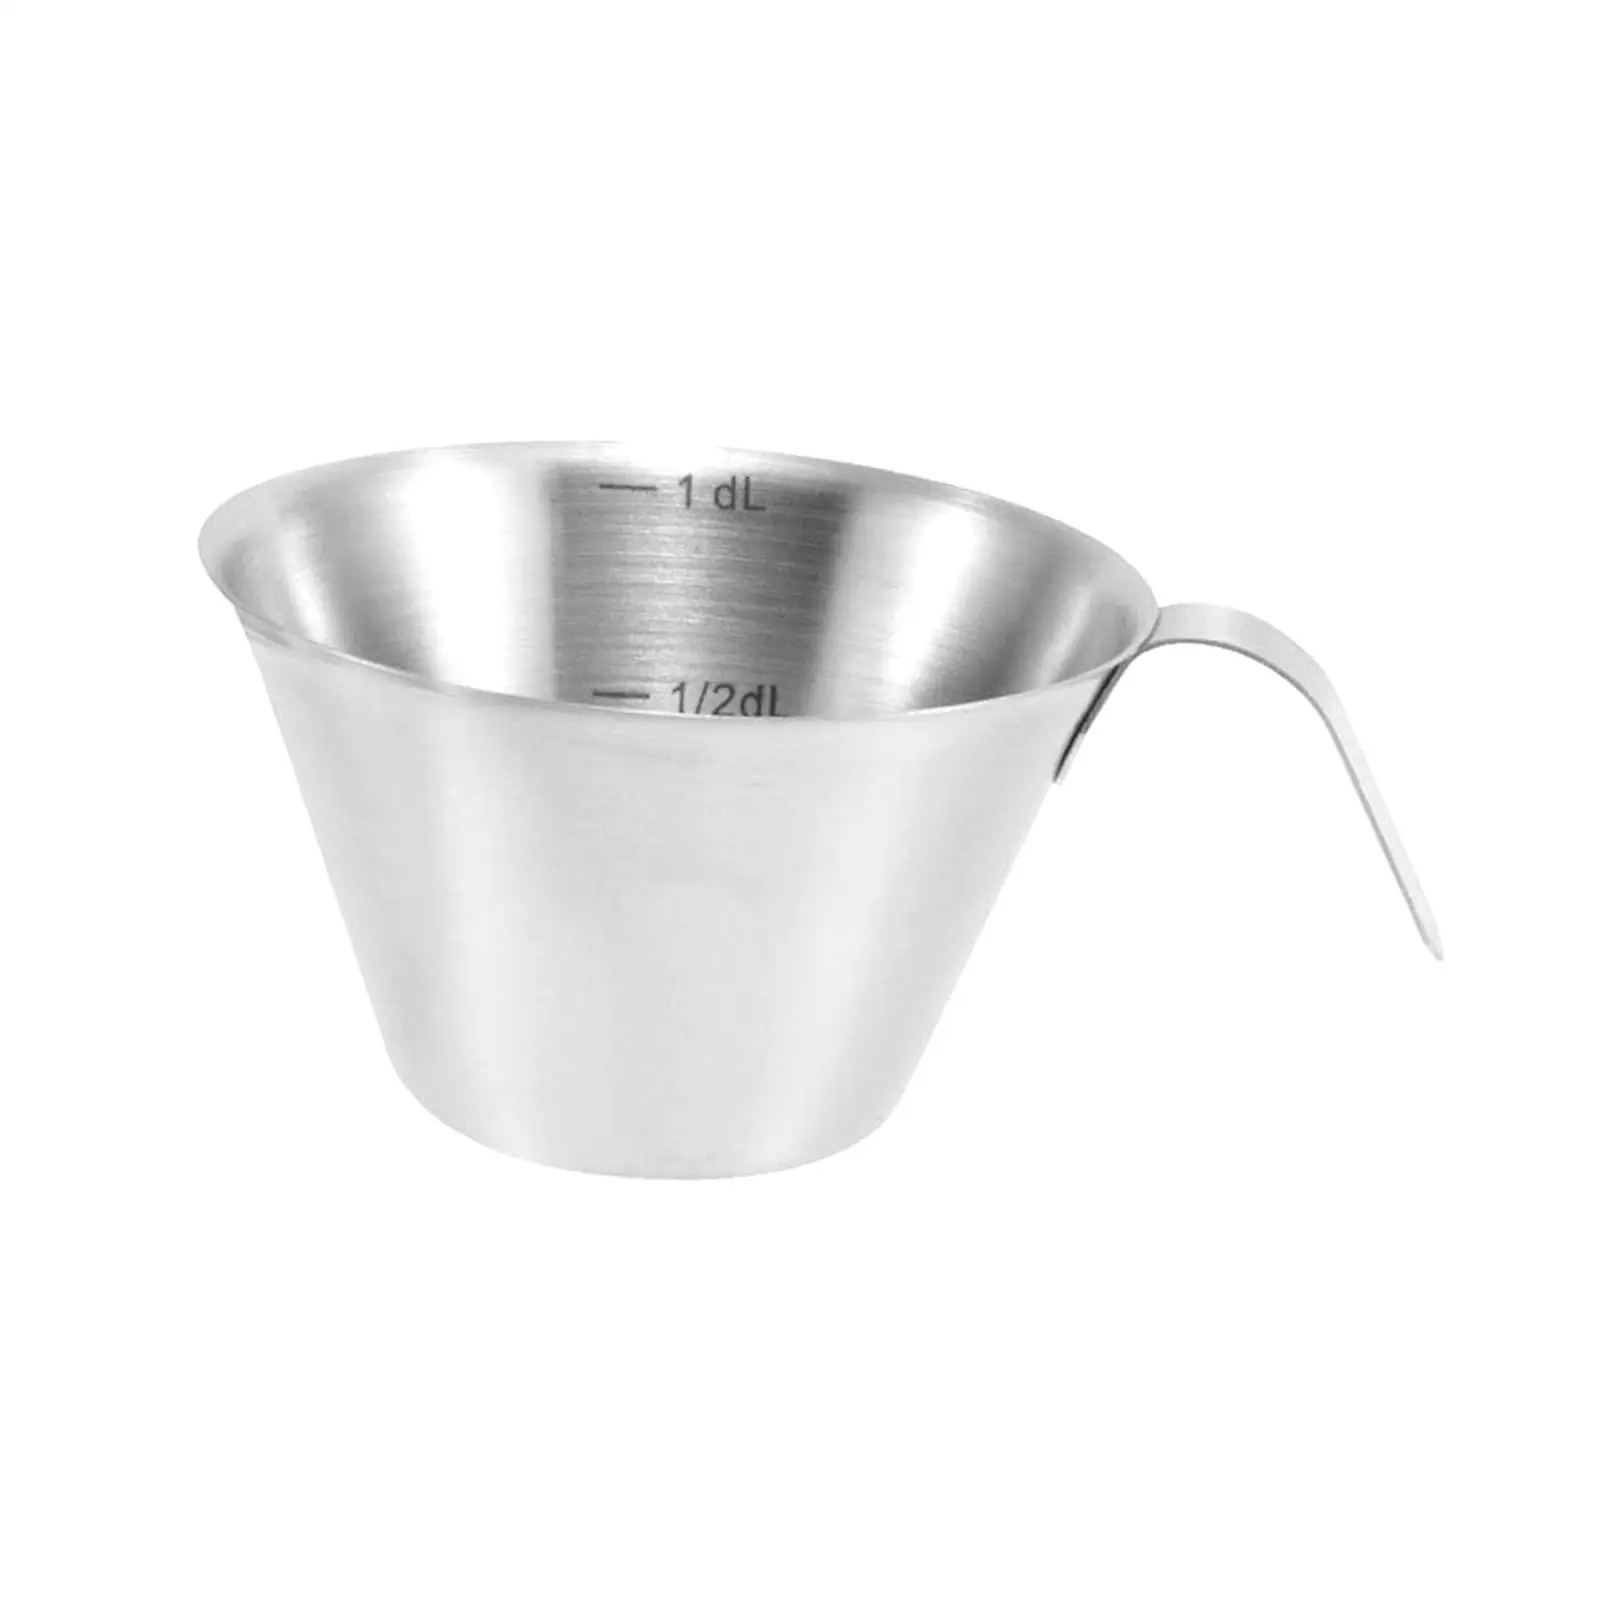 Stainless Steel Coffee Measuring Cup Pouring Cup Portable Espresso Accessories Mini Measuring Cup for Cooking Bar Tea Barista